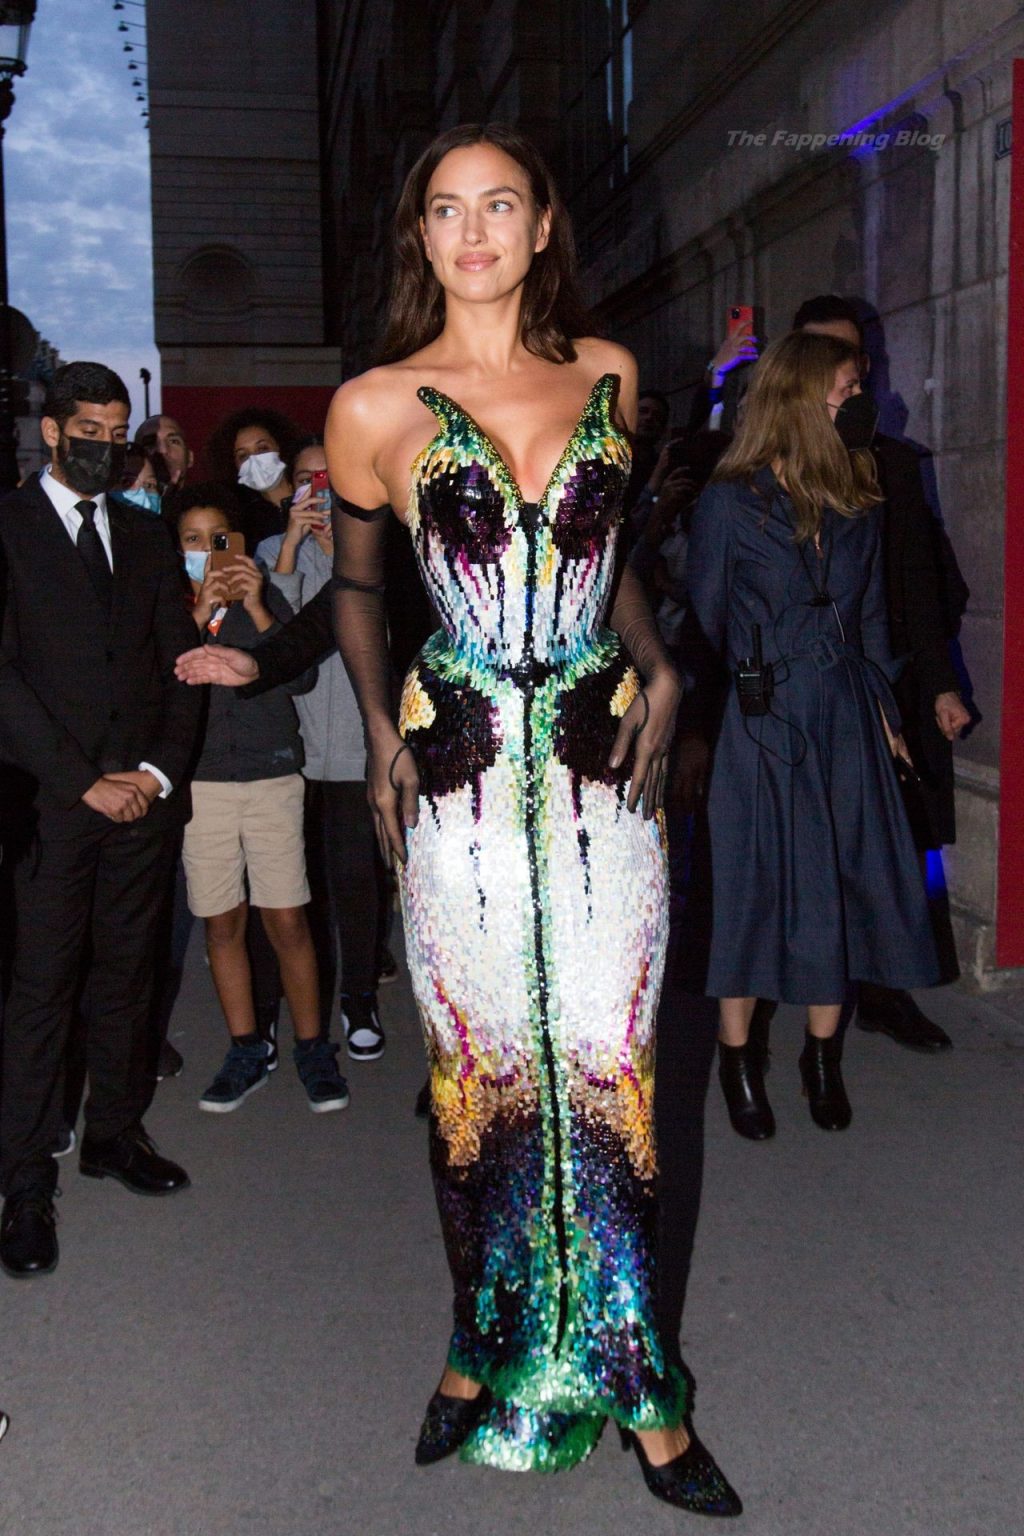 Irina Shayk Shows Off Her Cleavage As She attend the “Thierry Mugler: Couturissime” Photocall in Paris (35 Photos)